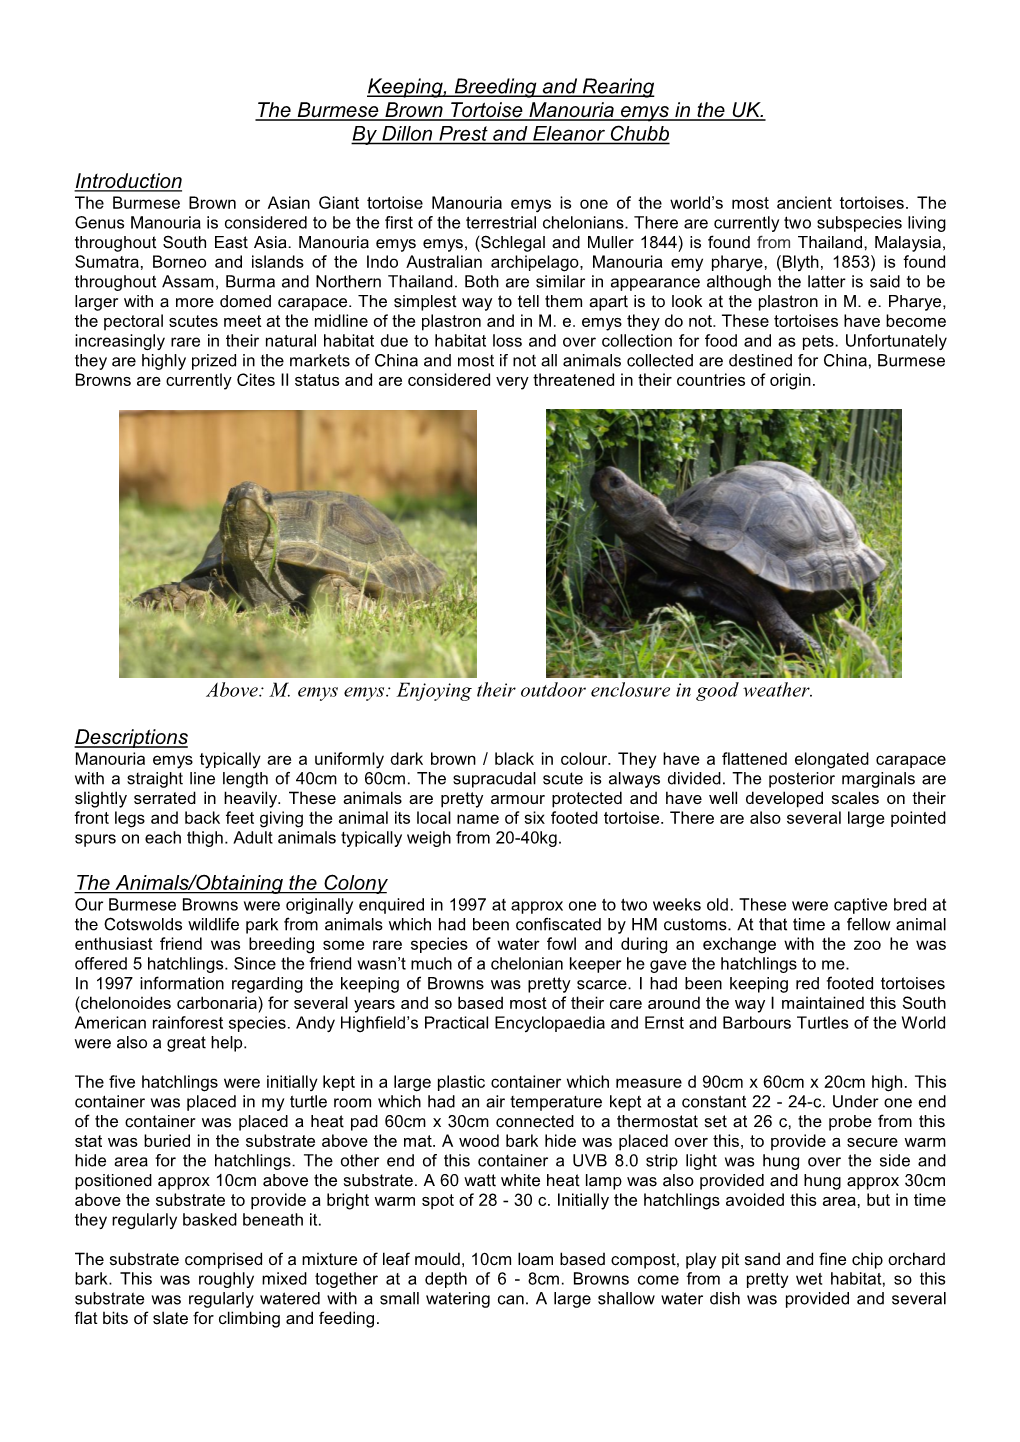 Keeping, Breeding and Rearing the Burmese Brown Tortoise Manouria Emys in the UK